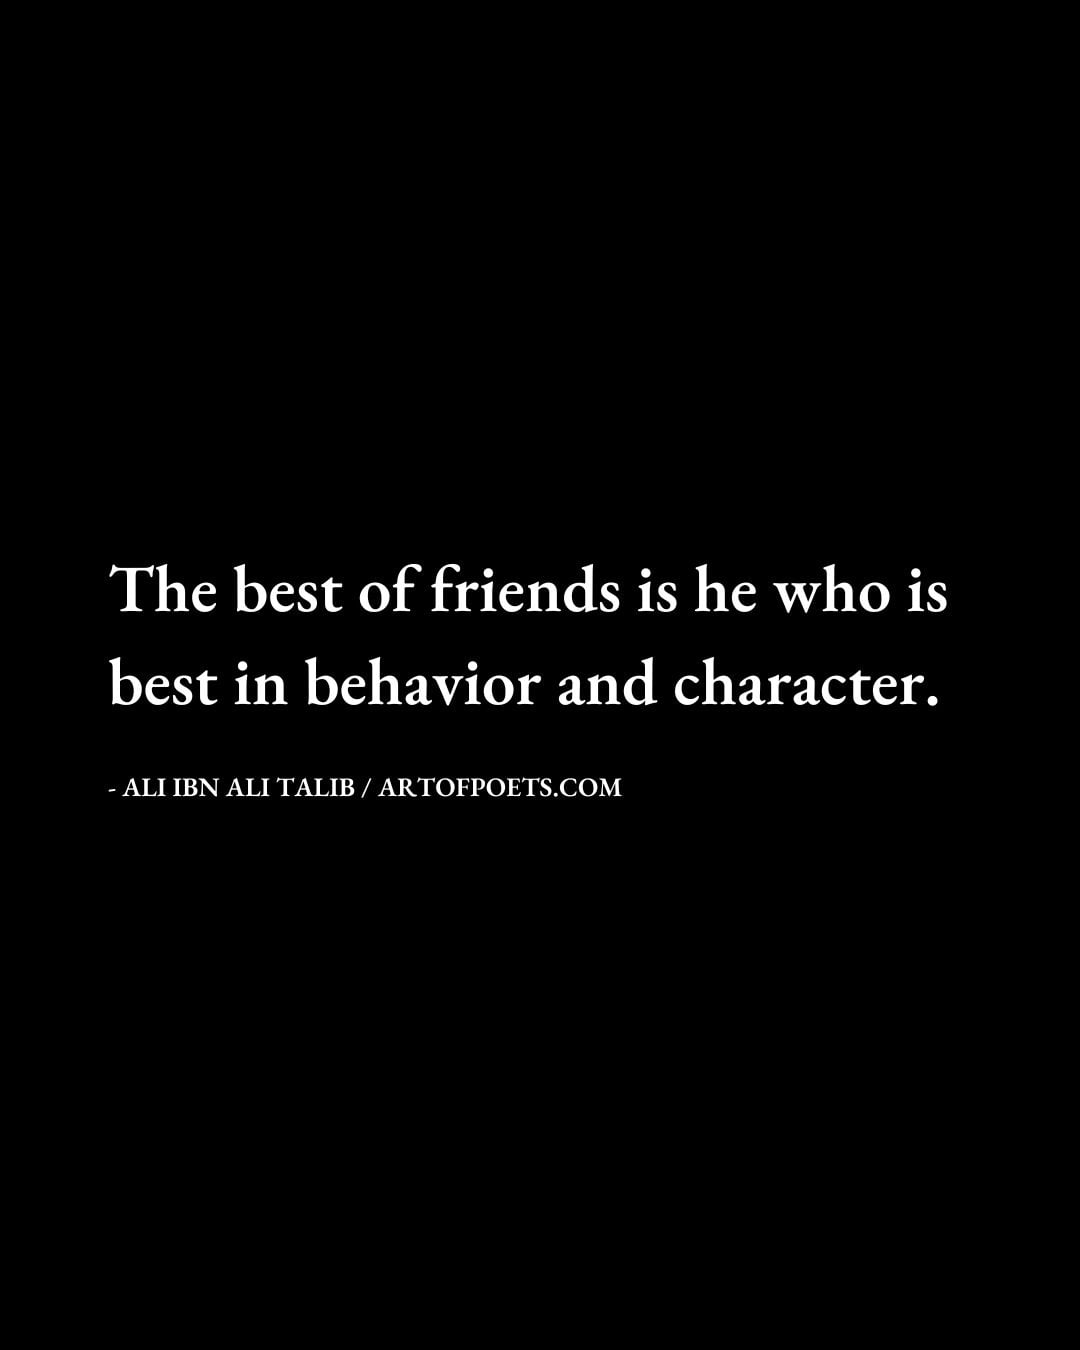 The best of friends is he who is best in behavior and character